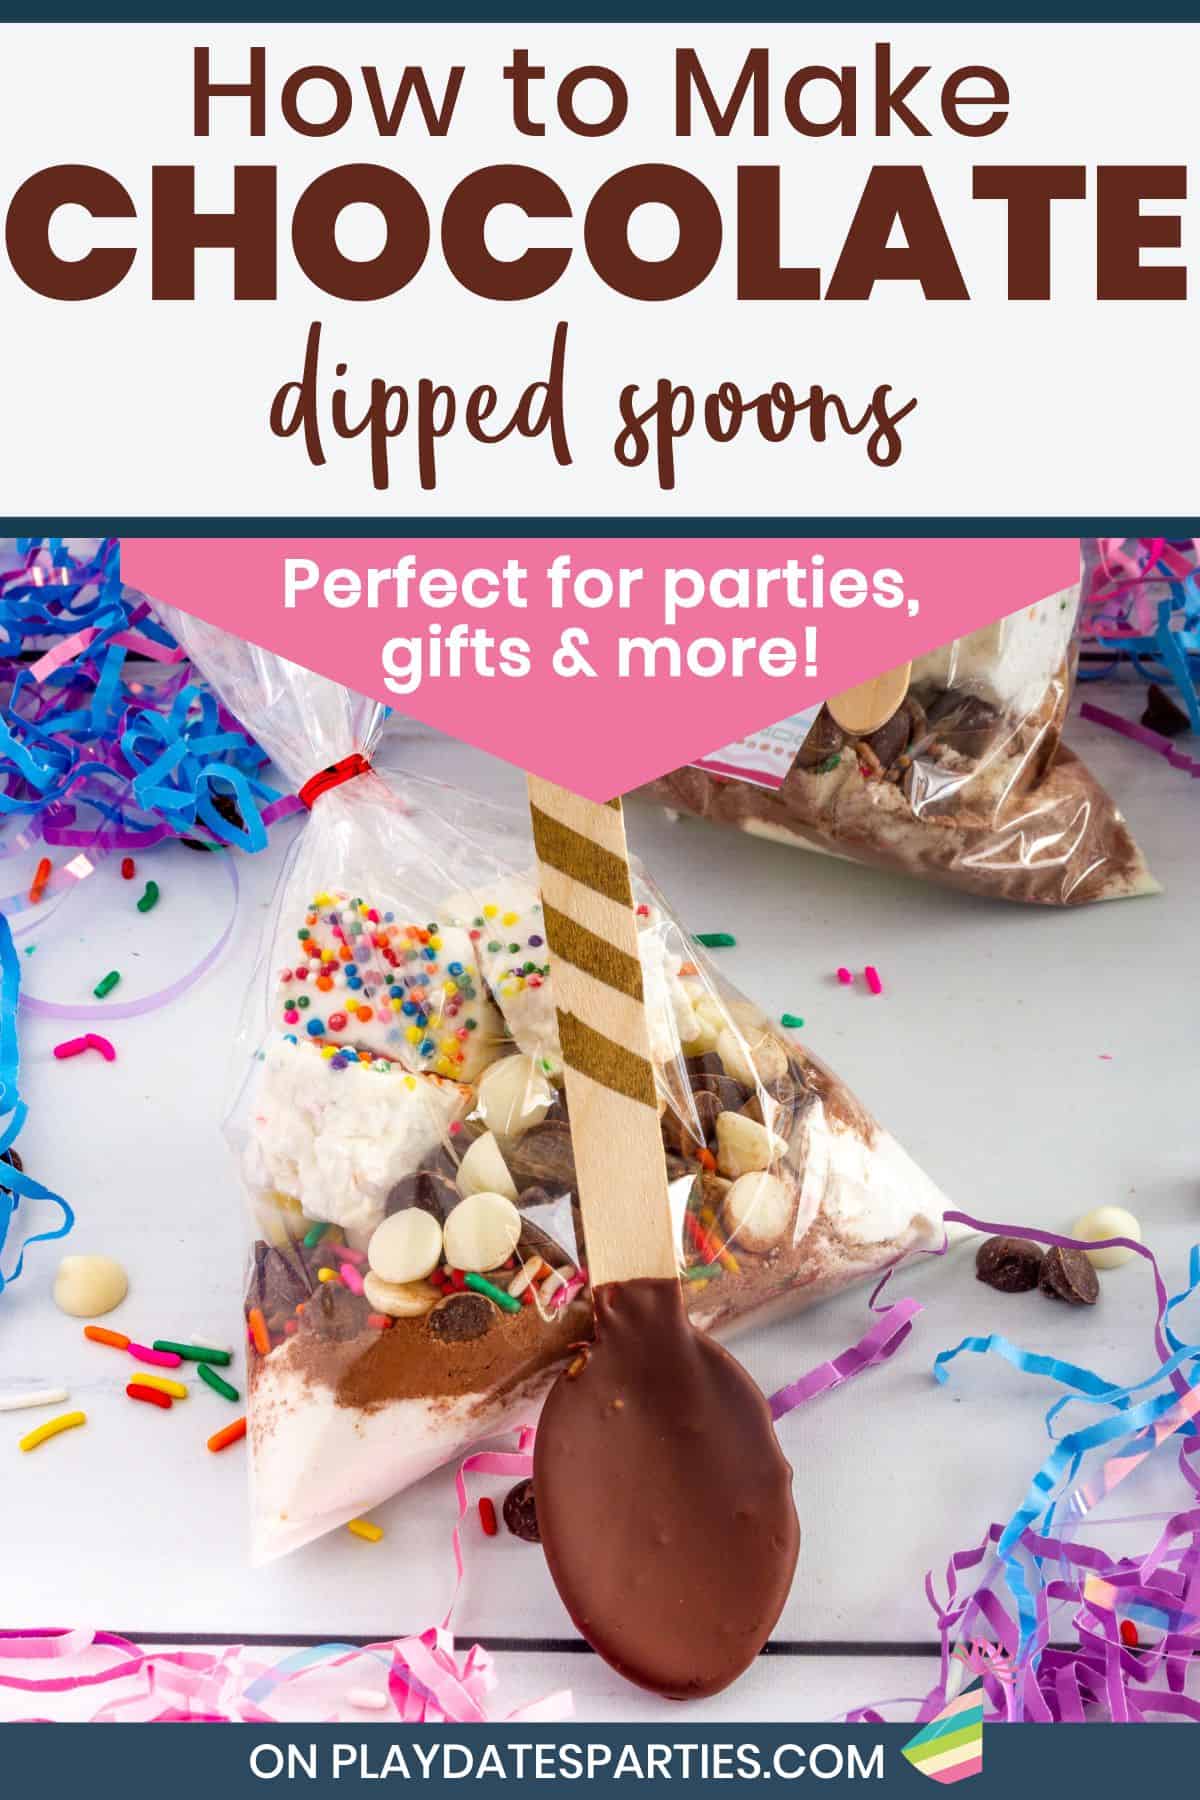 How to make chocolate dipped spoons for parties, gifts, and more.